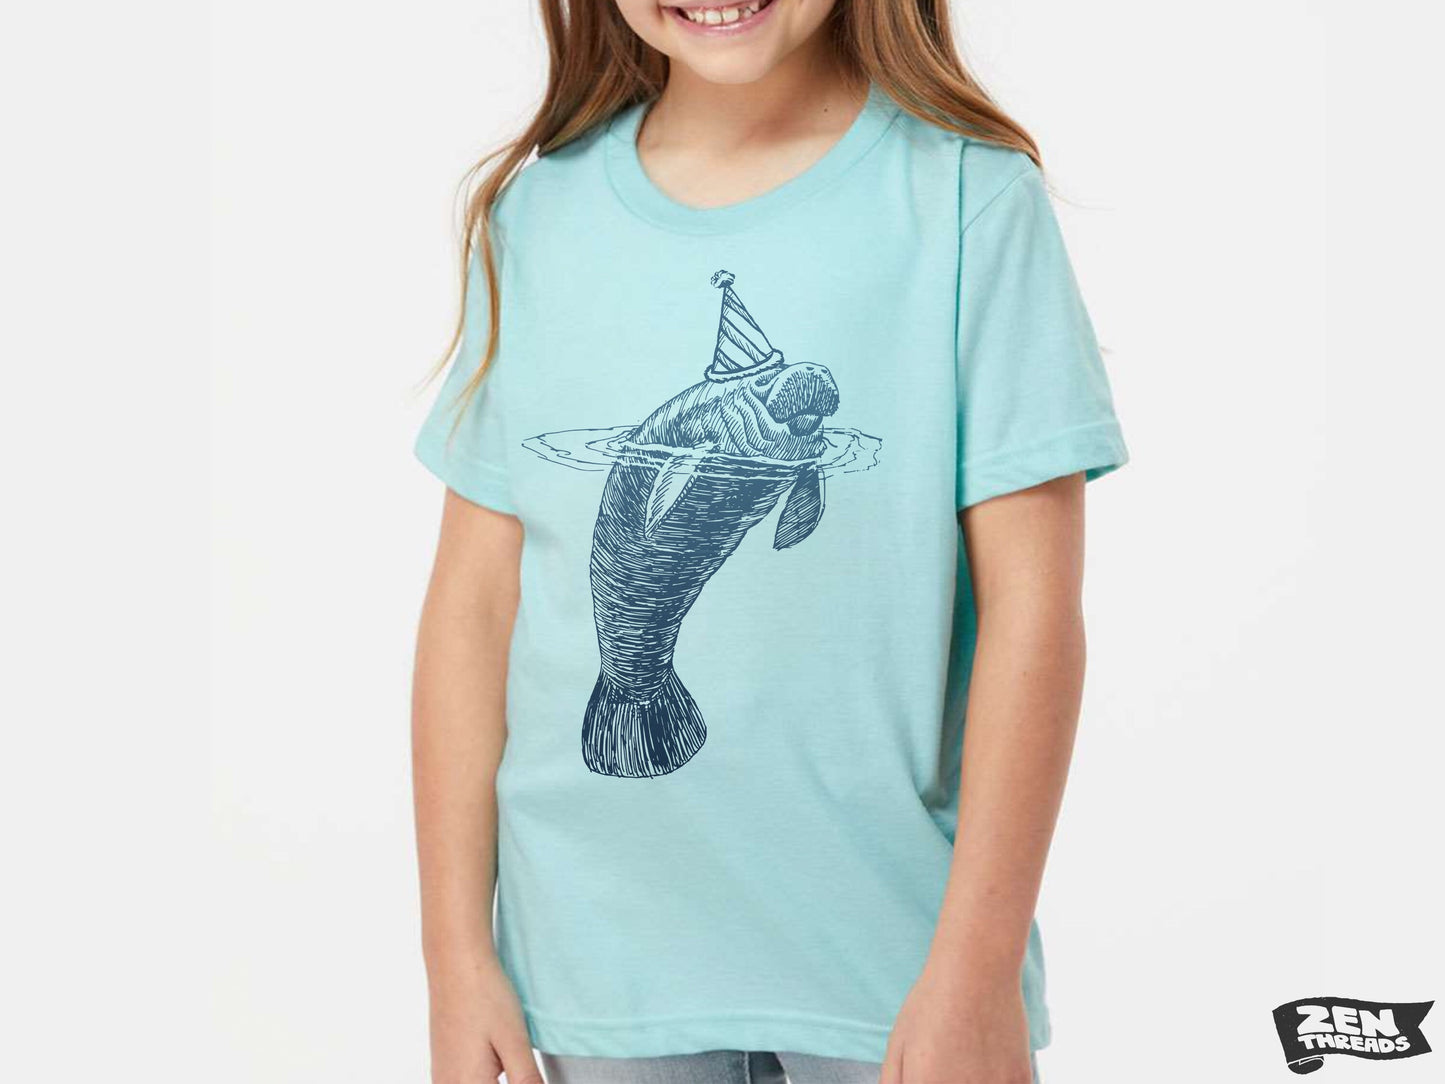 Kids MANATEE Party Hat Premium vintage soft Tee T-Shirt Fine Jersey T-Shirt +Colors youth toddler Florida sea cow whale mammal birthday top